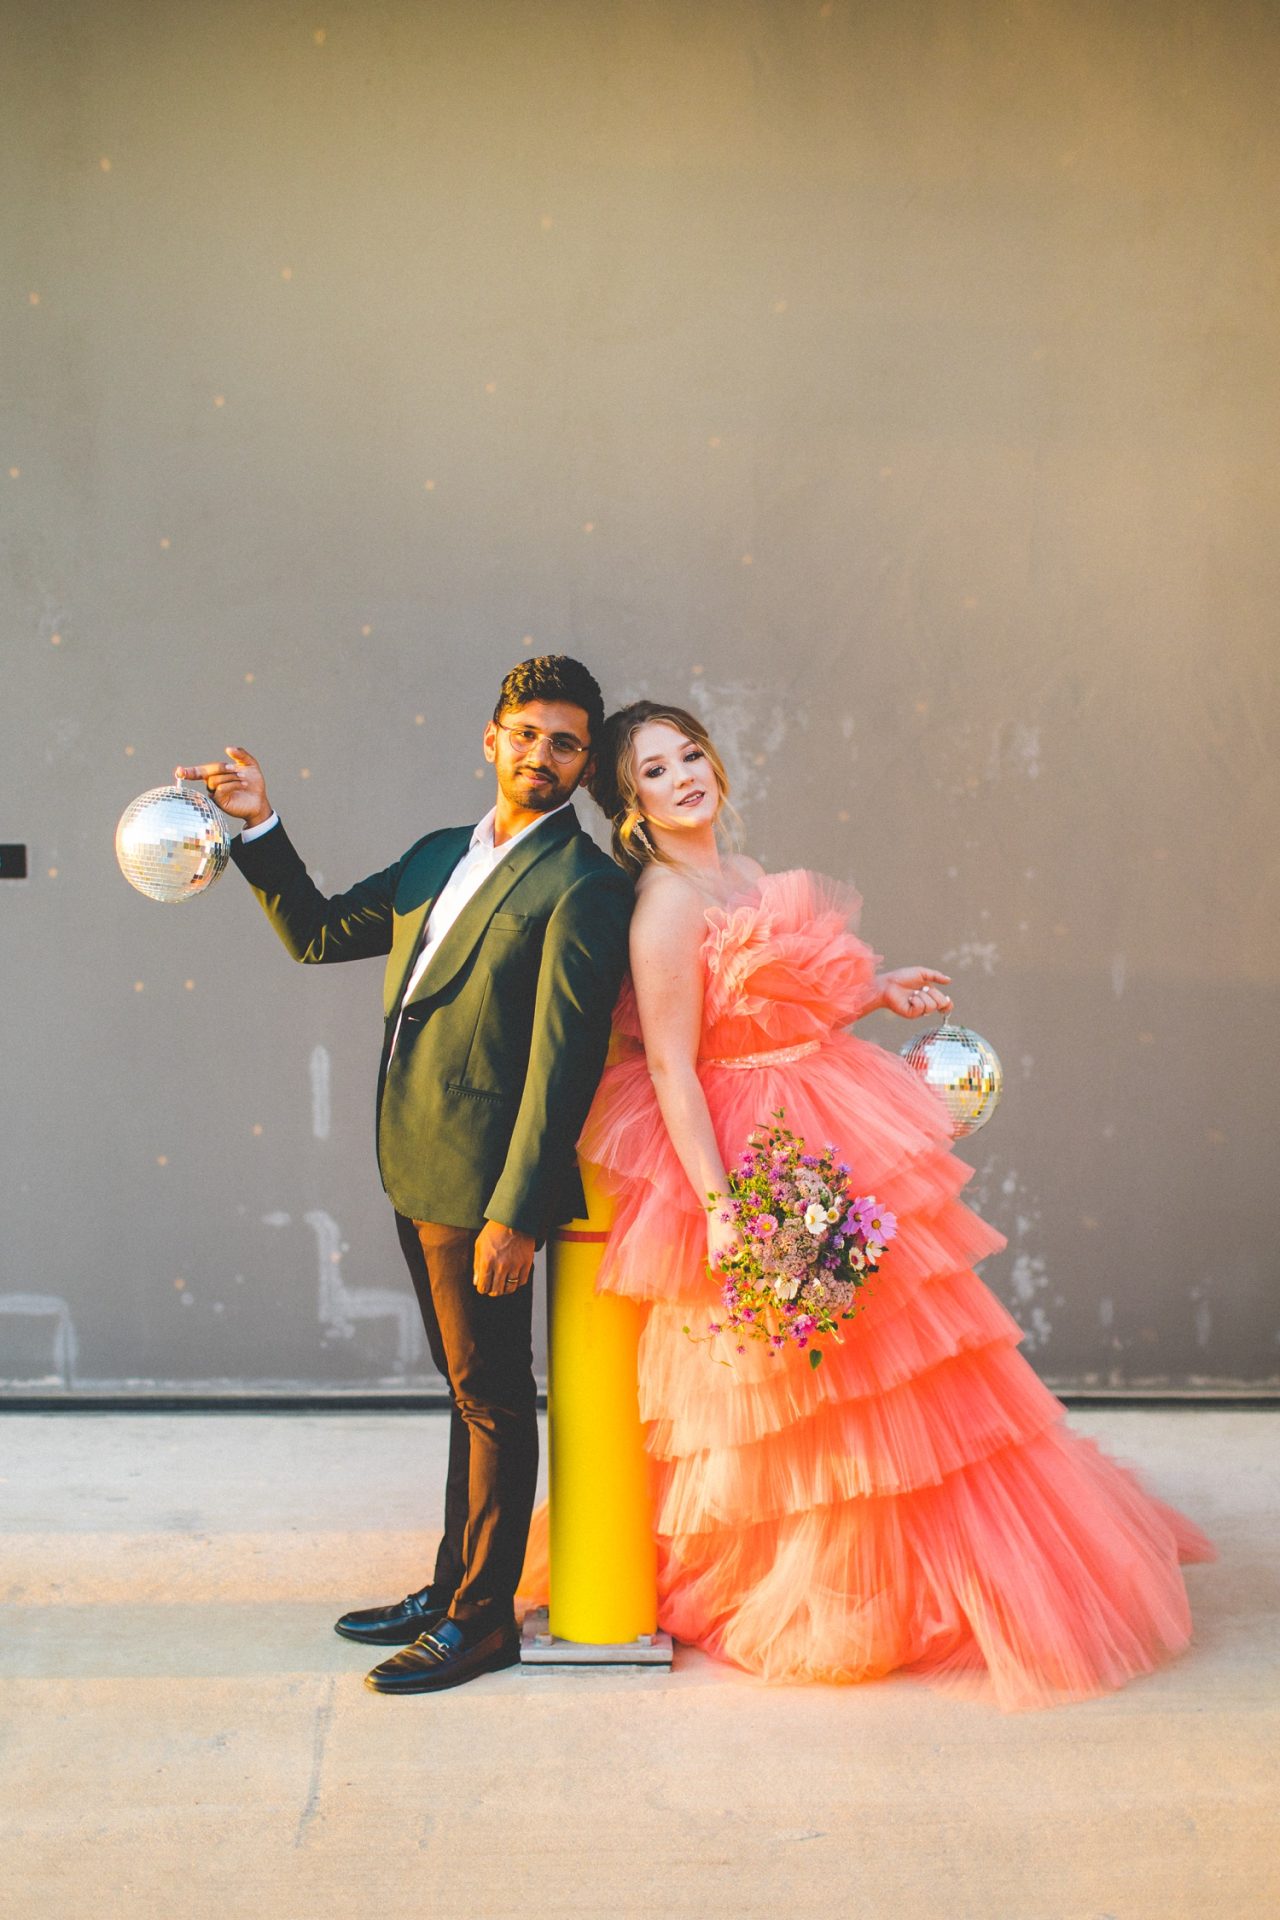 parking garage engagement photographs with disco balls by Lissa Chandler 